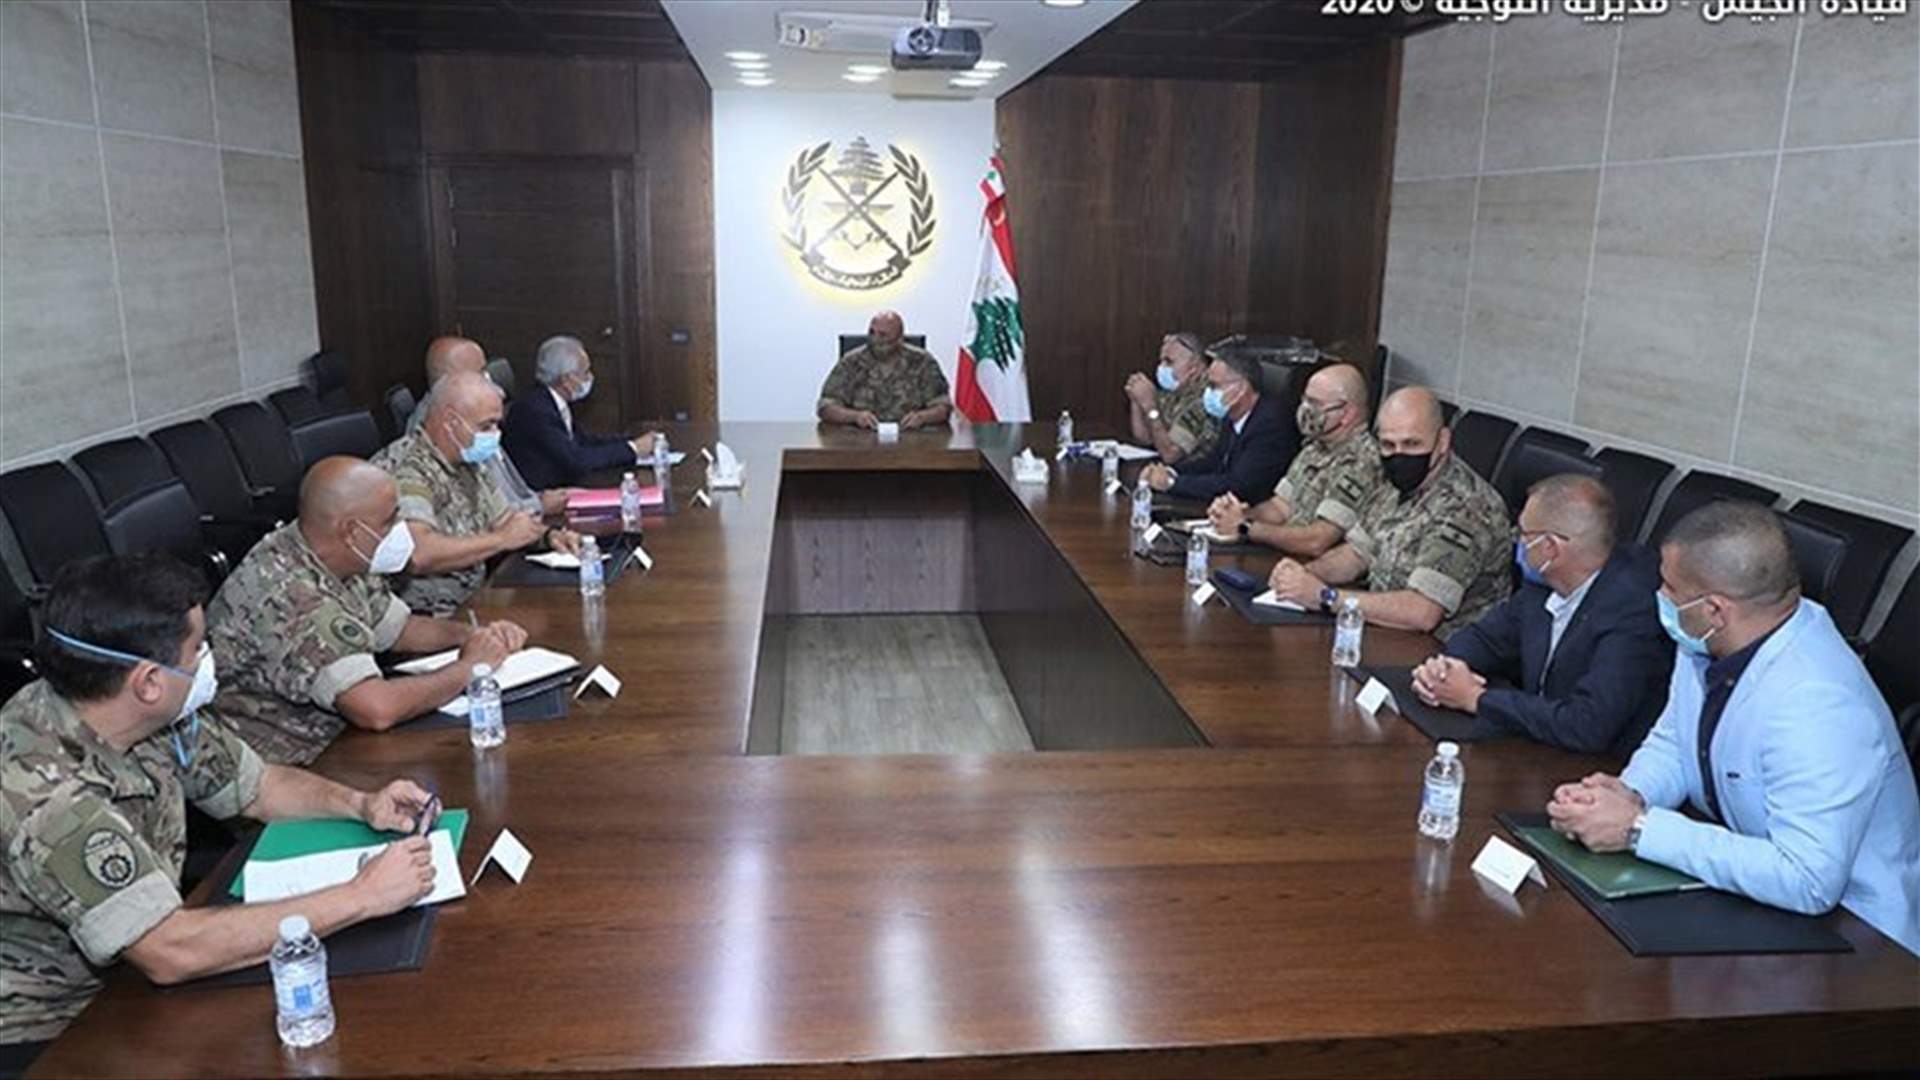 LAF Commander Aoun chairs meeting on Beirut port explosion